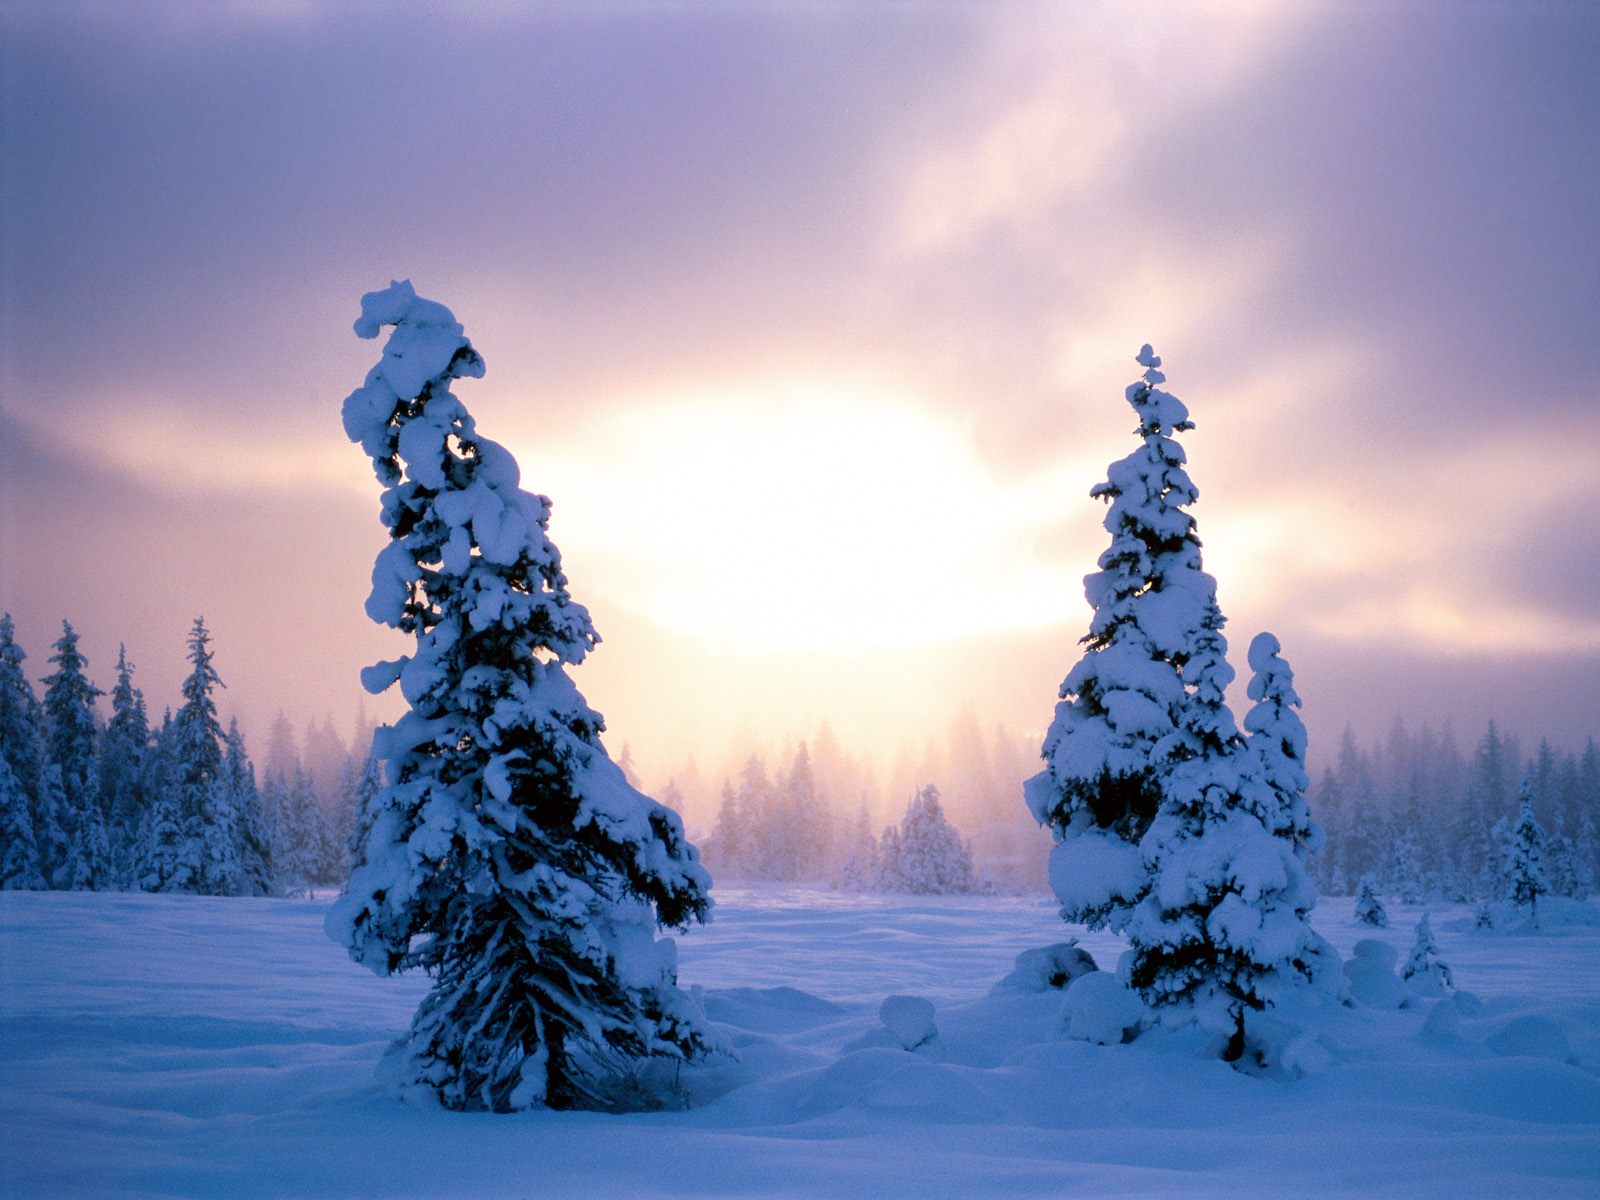 Winter Wallpaper Pictures In Full Size Just Click On The